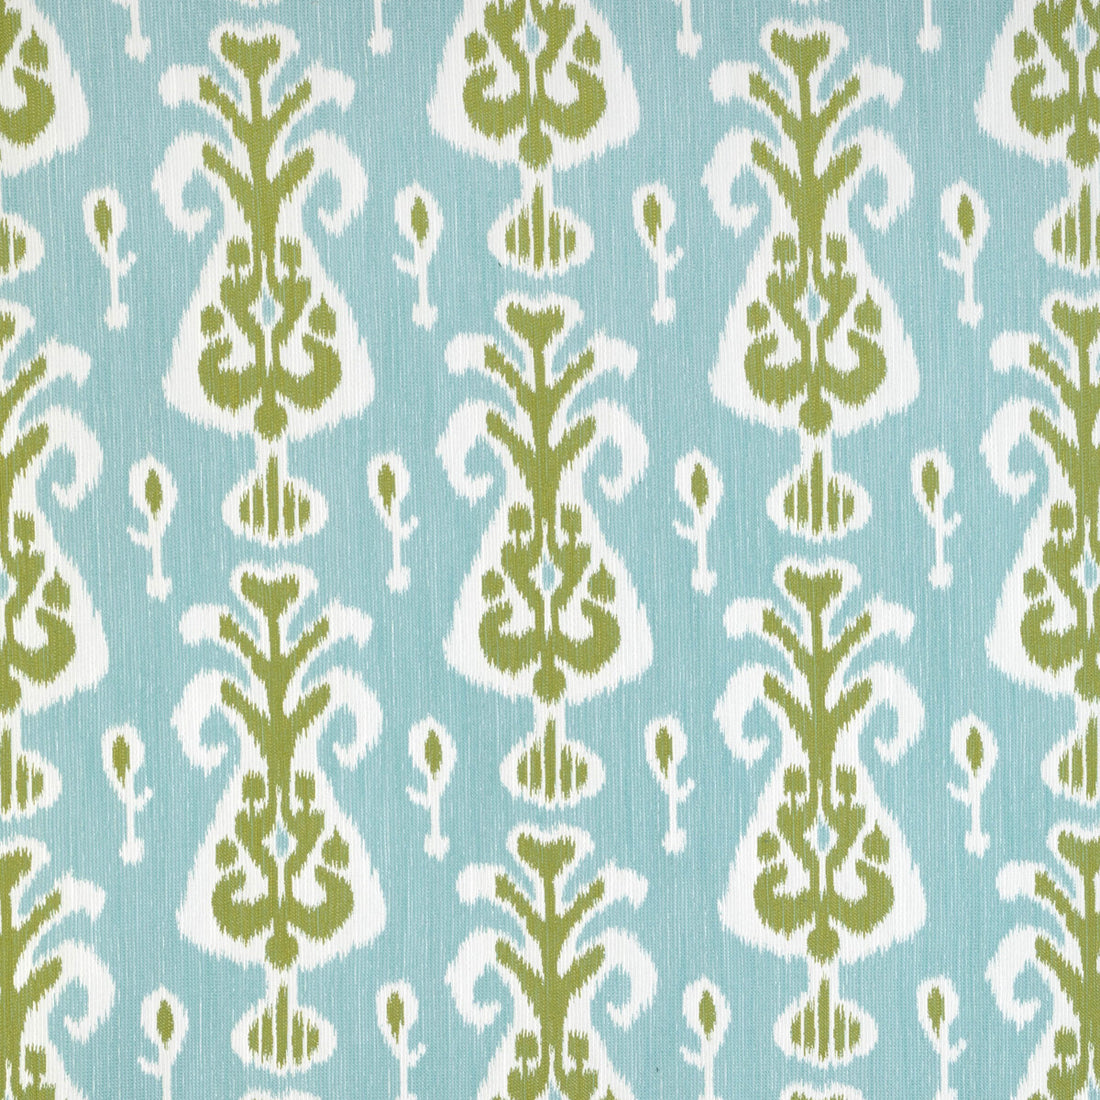 Kravet Design fabric in 36791-153 color - pattern 36791.153.0 - by Kravet Design in the Sea Island Inside Out collection